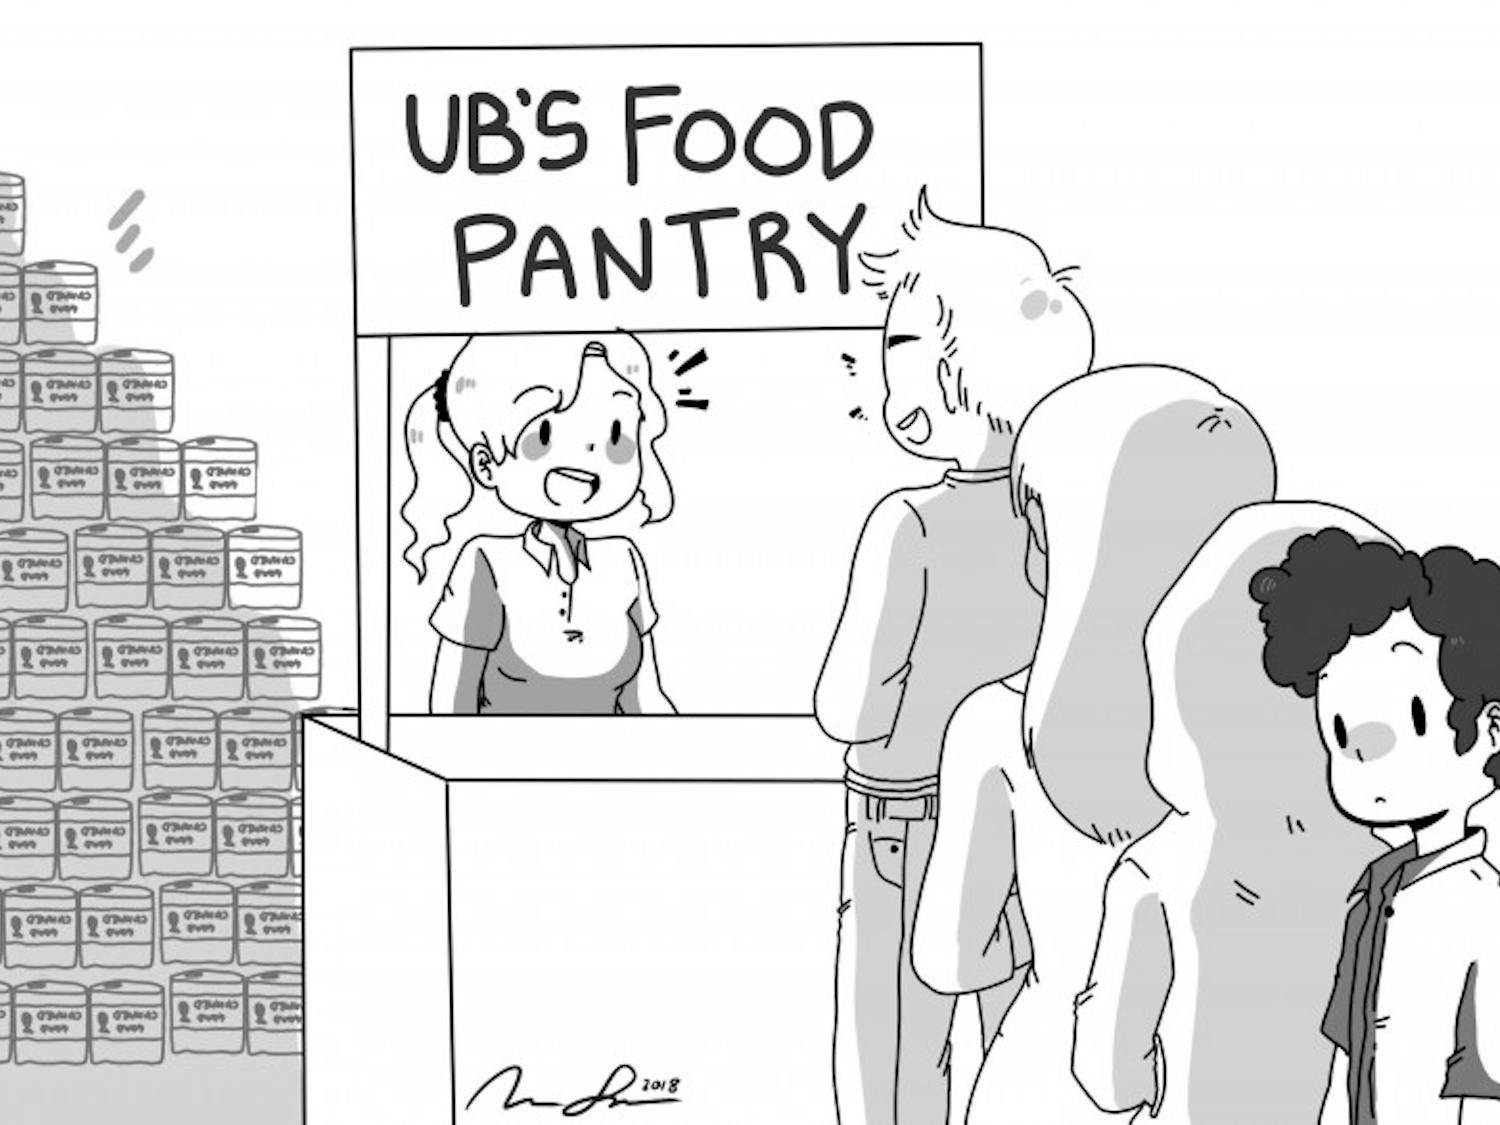 UB’s Food Pantry Task Force is creating plans for an on-campus food pantry to help combate students’ food insecurities. Plans will be submitted in November and construction is planned for January.